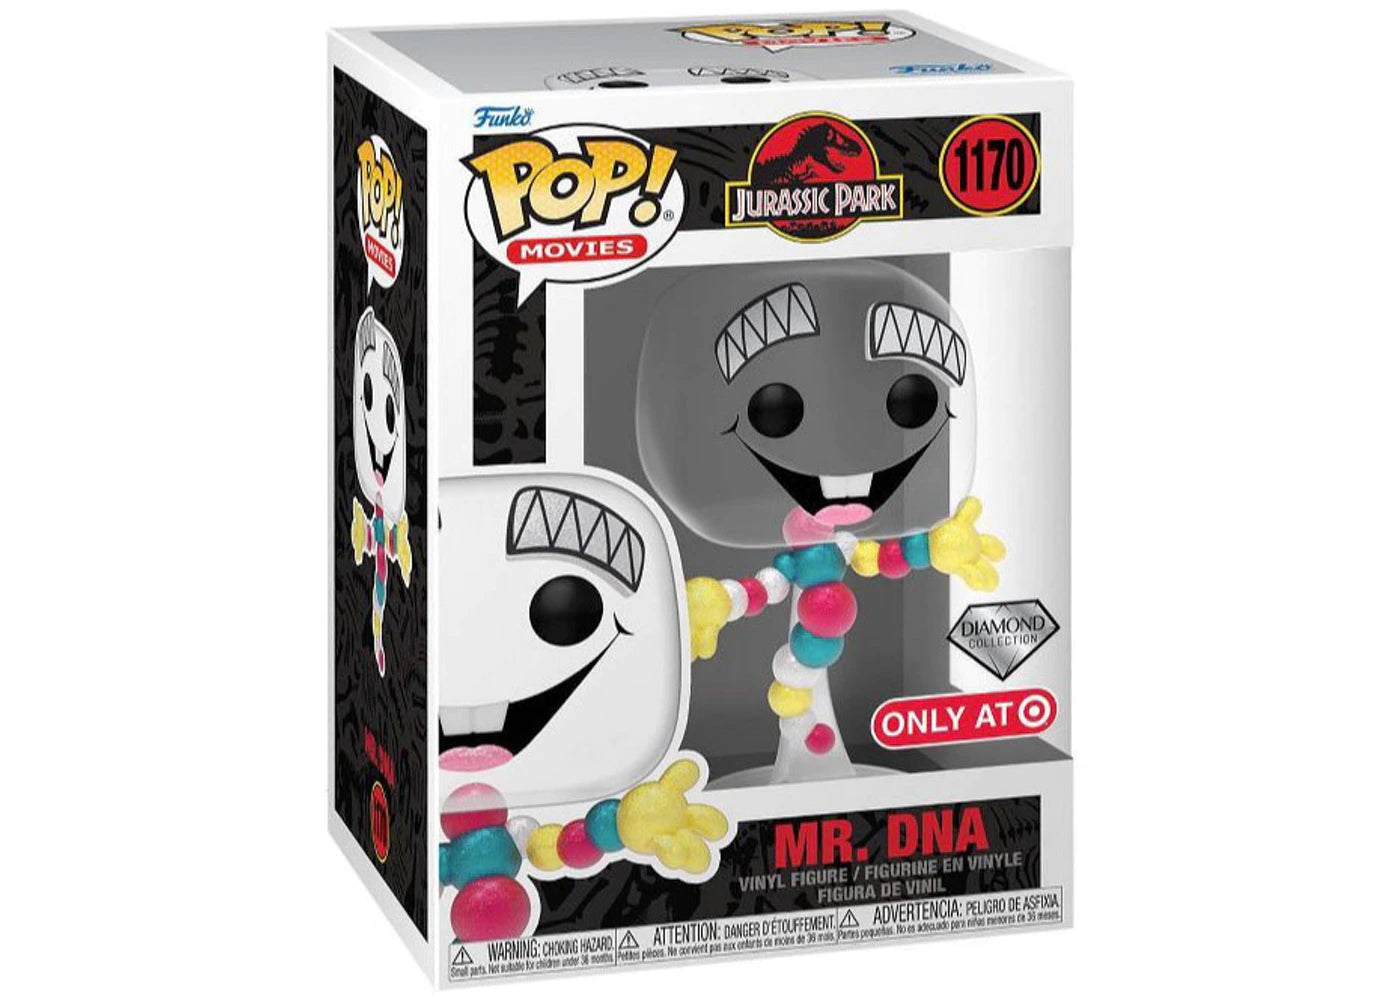 Funko Pop! 1170 Mr. DNA [Jurassic Park] - Diamond Collection & Only at Target